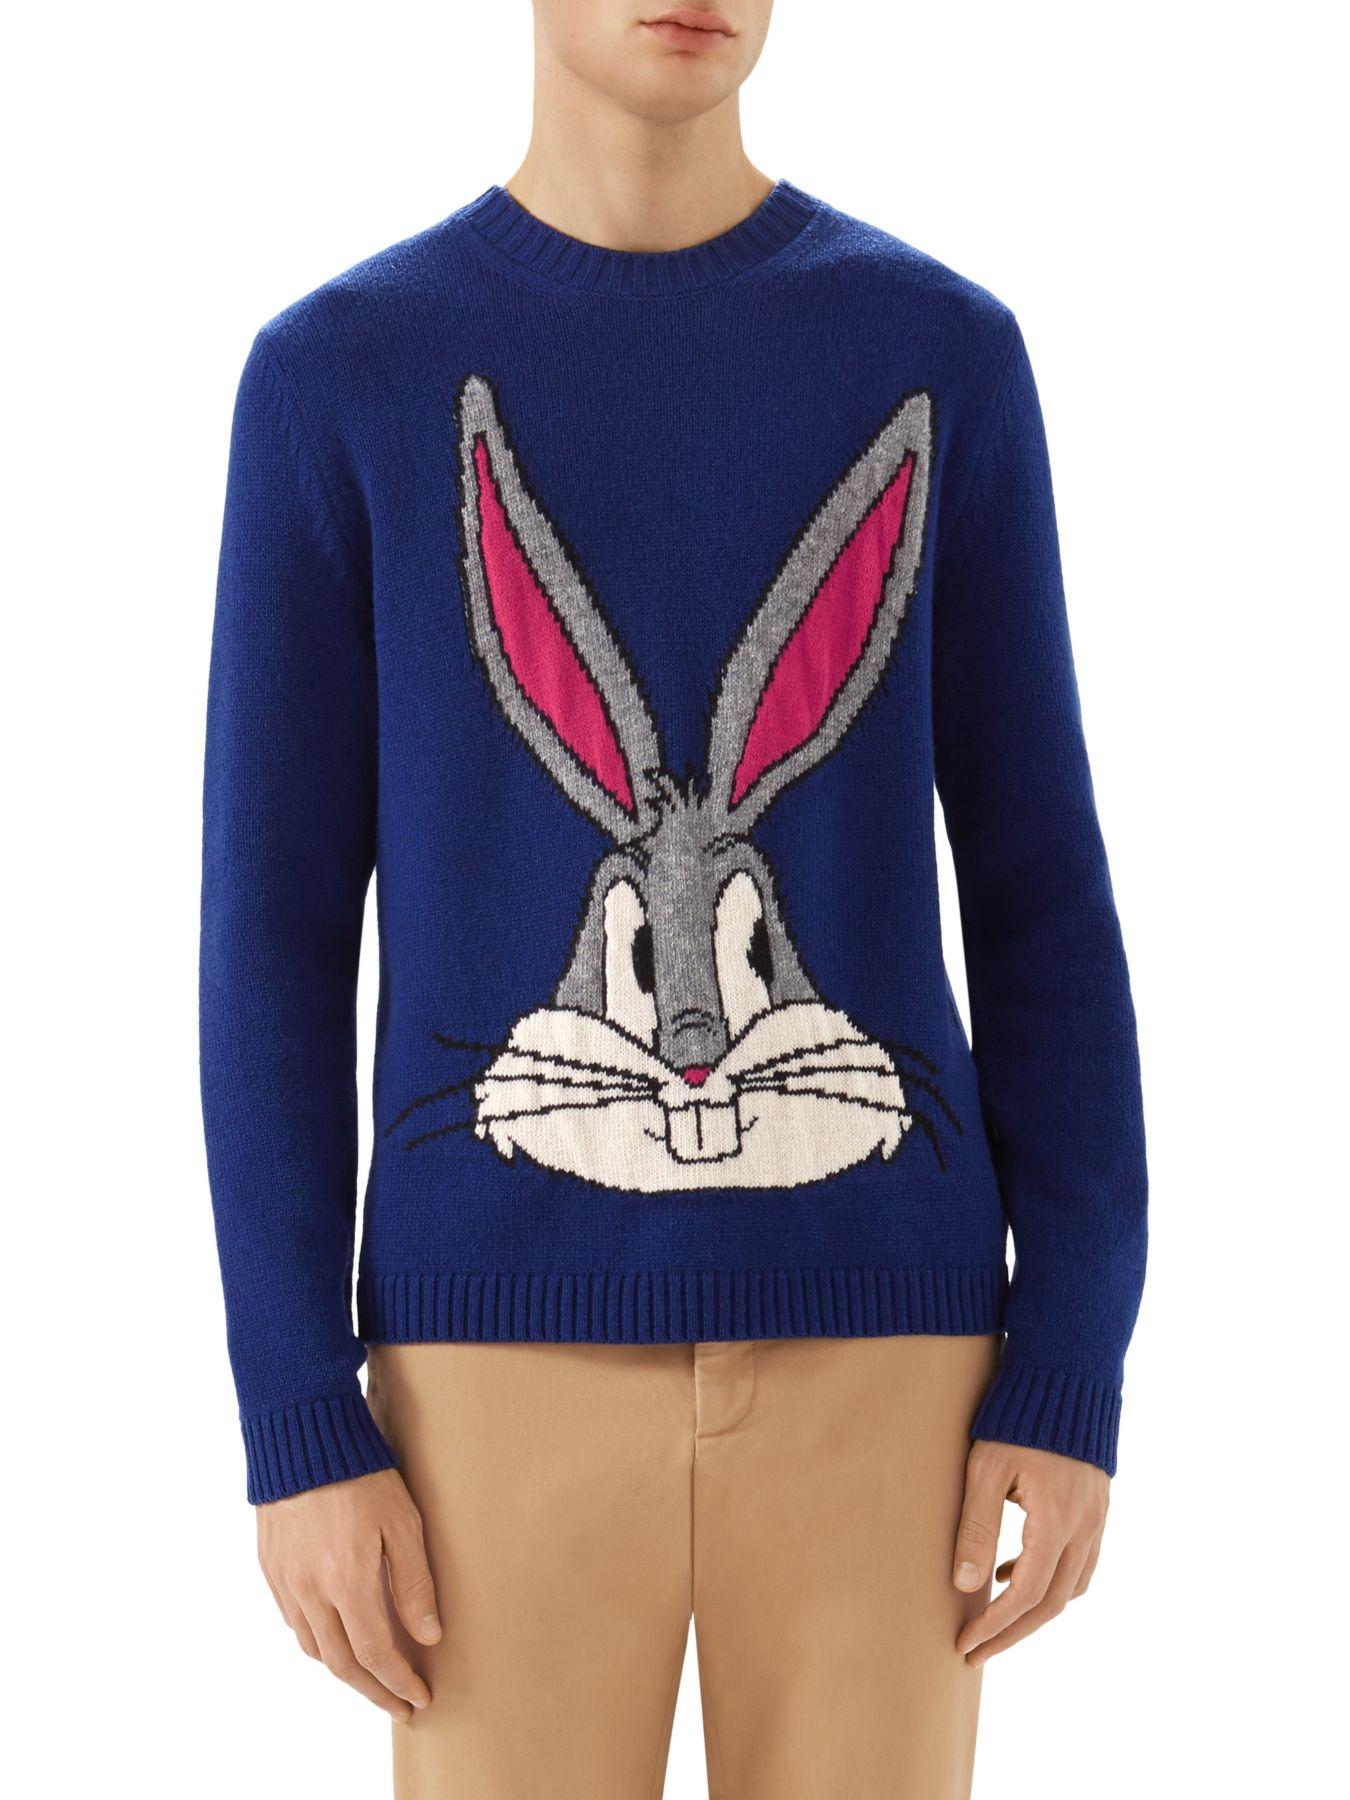 Gucci Bugs Bunny Wool Knit Sweater in Blue for Men - Lyst